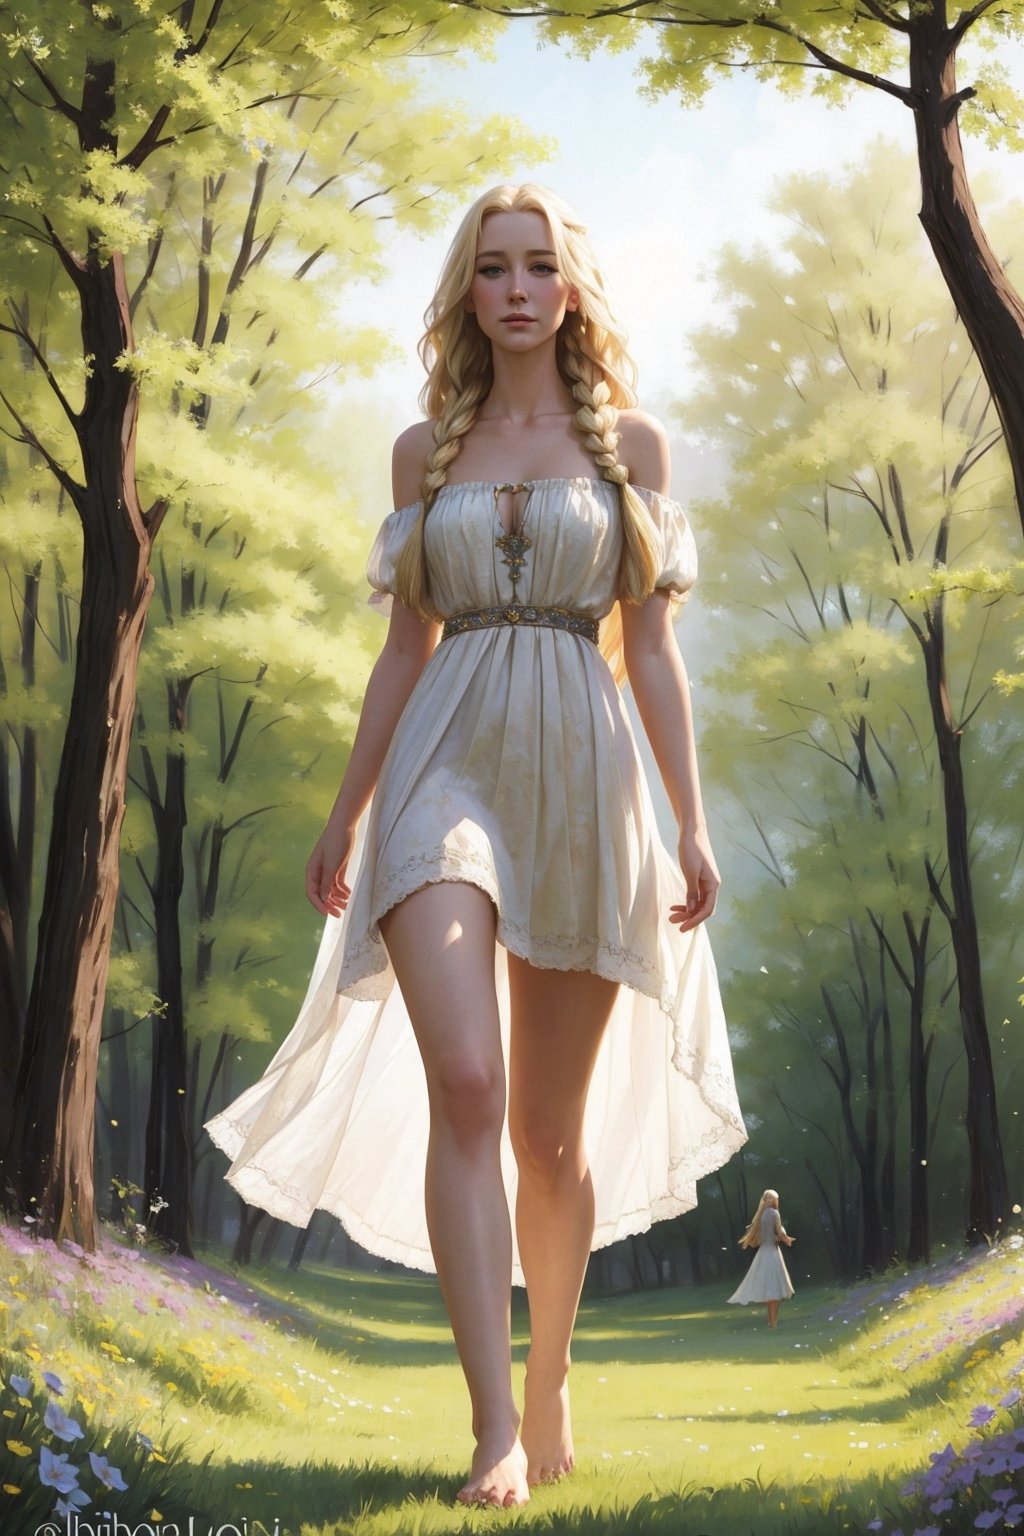 Portrait of a 25-year-old girl with long blonde hair, dressed in a dress made of light material, barefoot, standing in a meadow among flowers, looking down,
 brom's art, depiction of an epic fantasy character, portrait of a character, fantasy art, works by Richard Schmid, A.Mukha, Volegov, impressionism